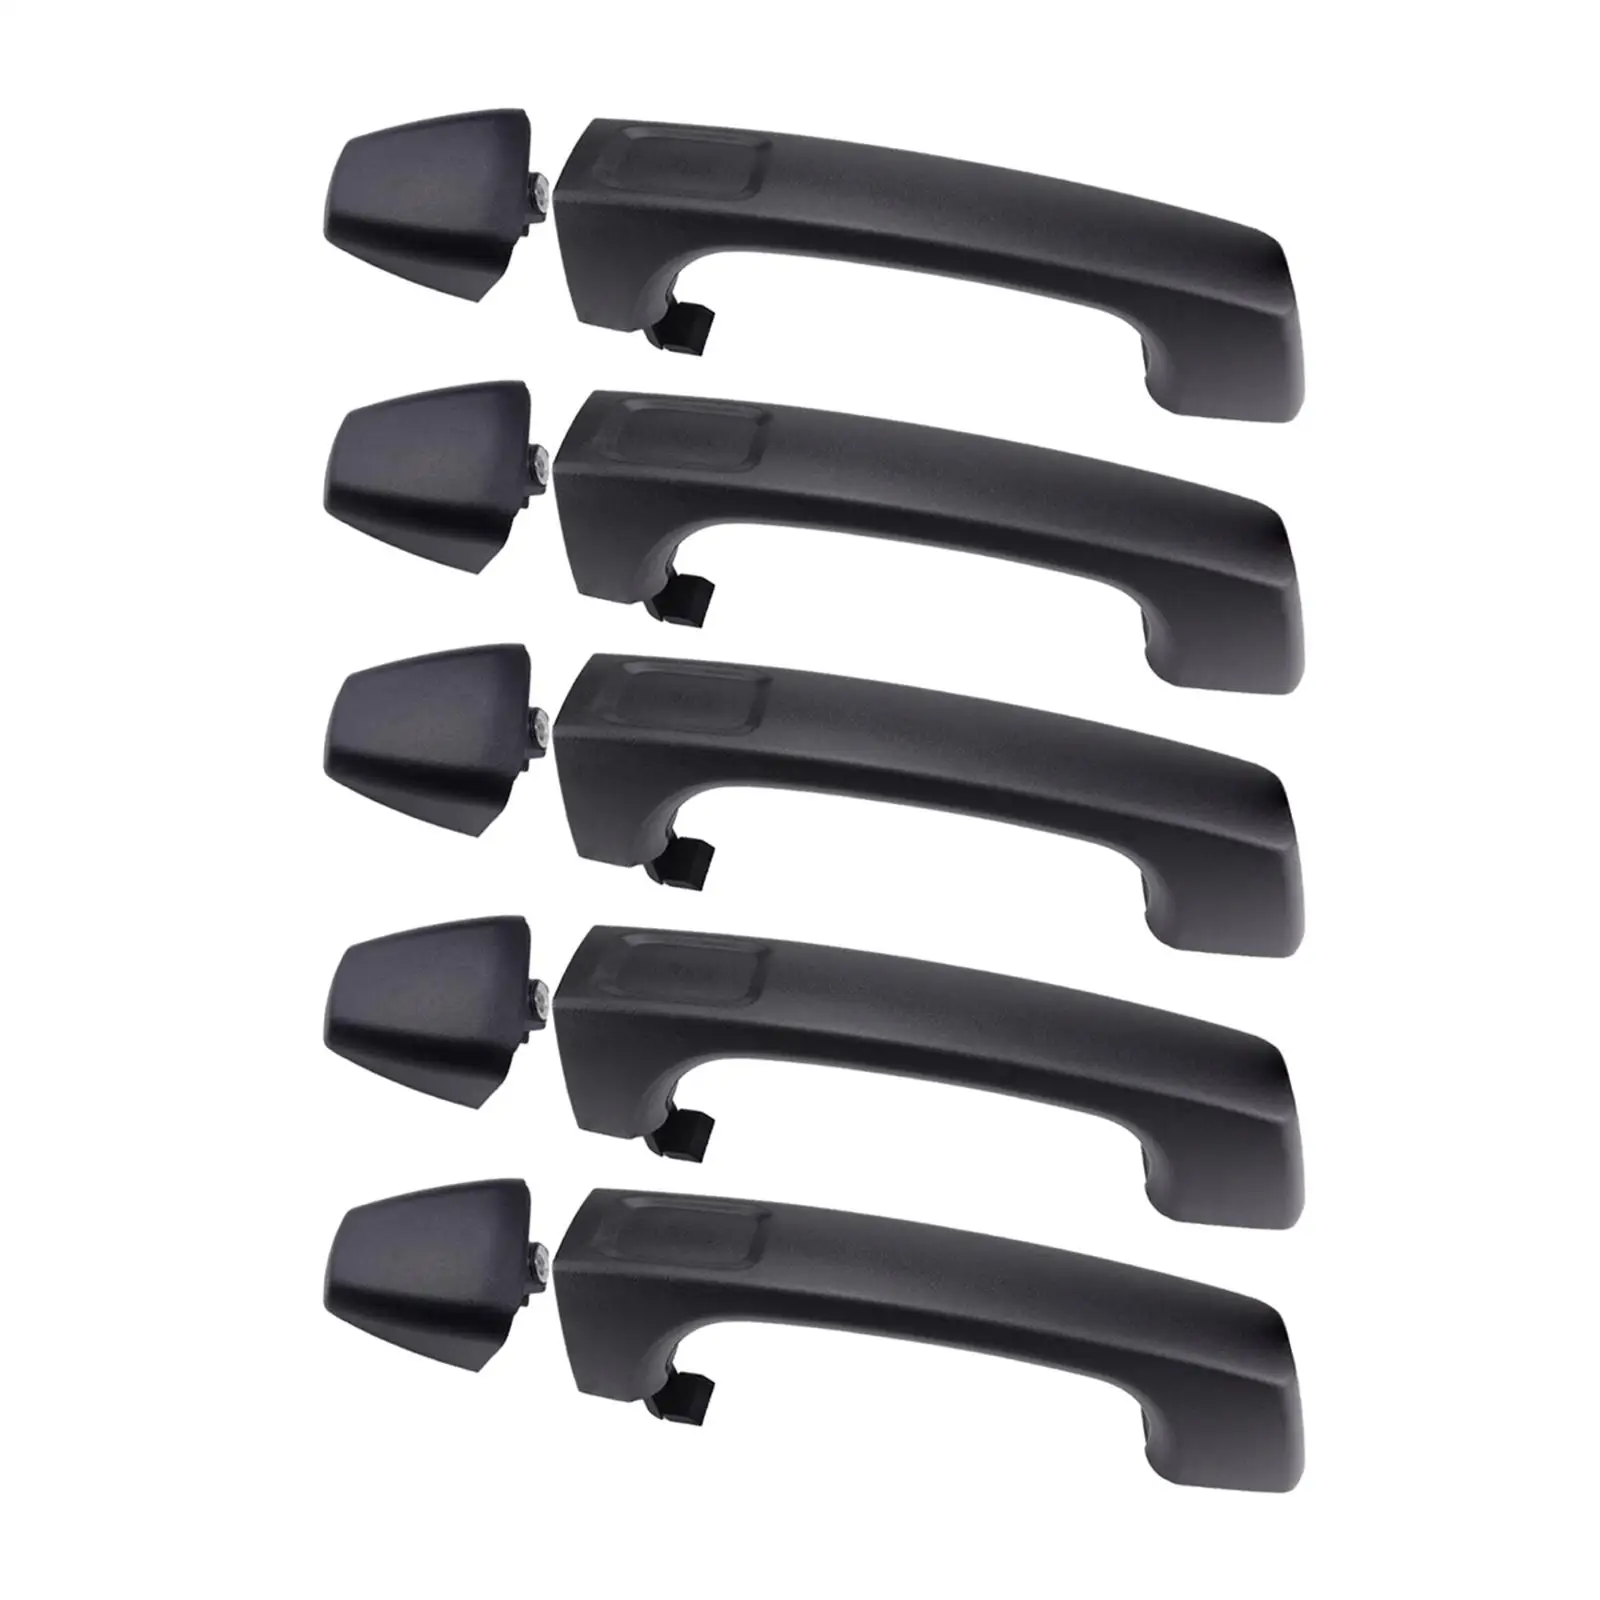 

5Pcs Door Handle Replaces Black High Performance 25957911 for Hummer H3